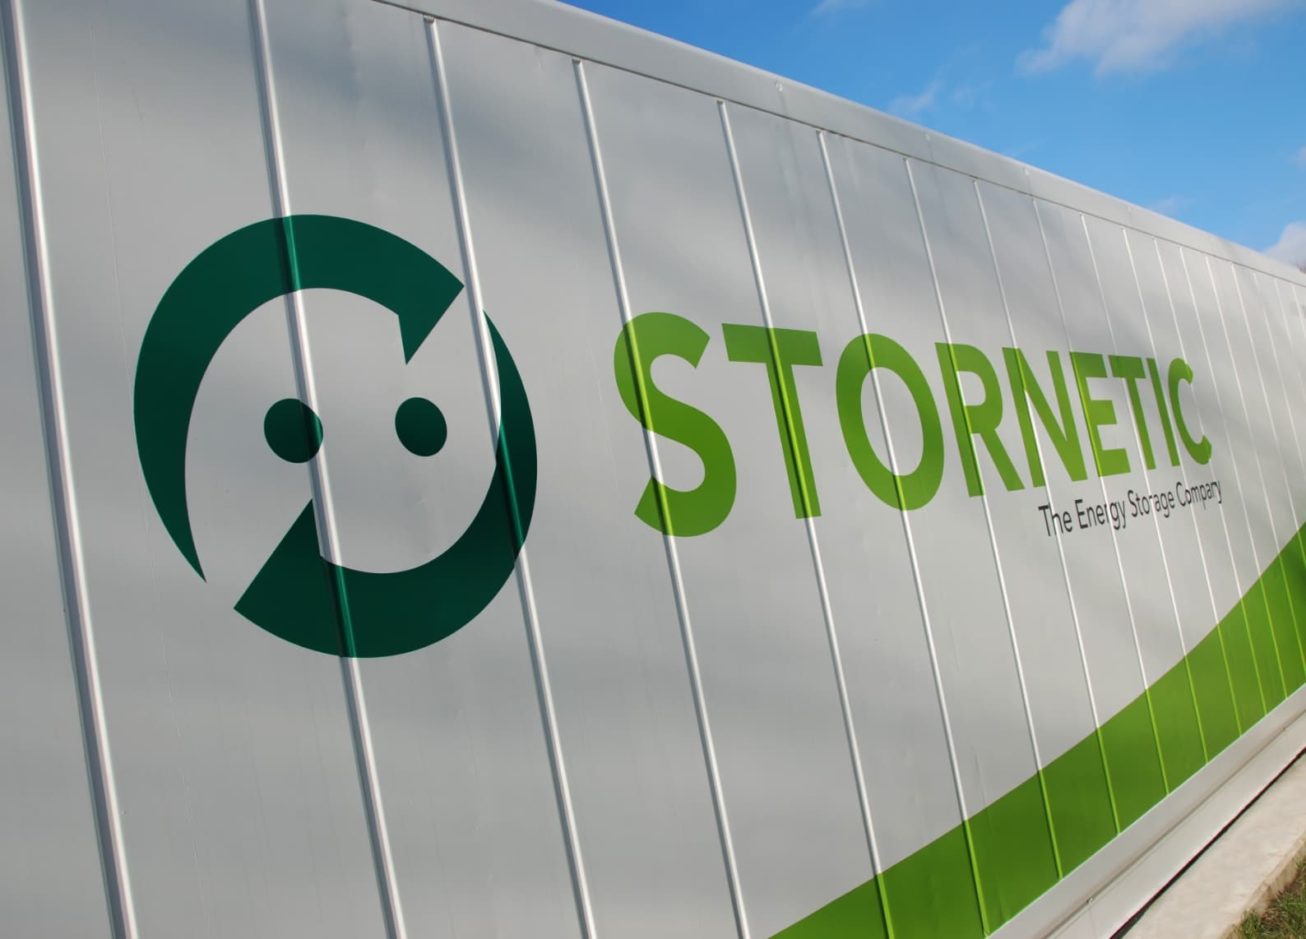 Stornetic logo on the exterior of a DuraStor container